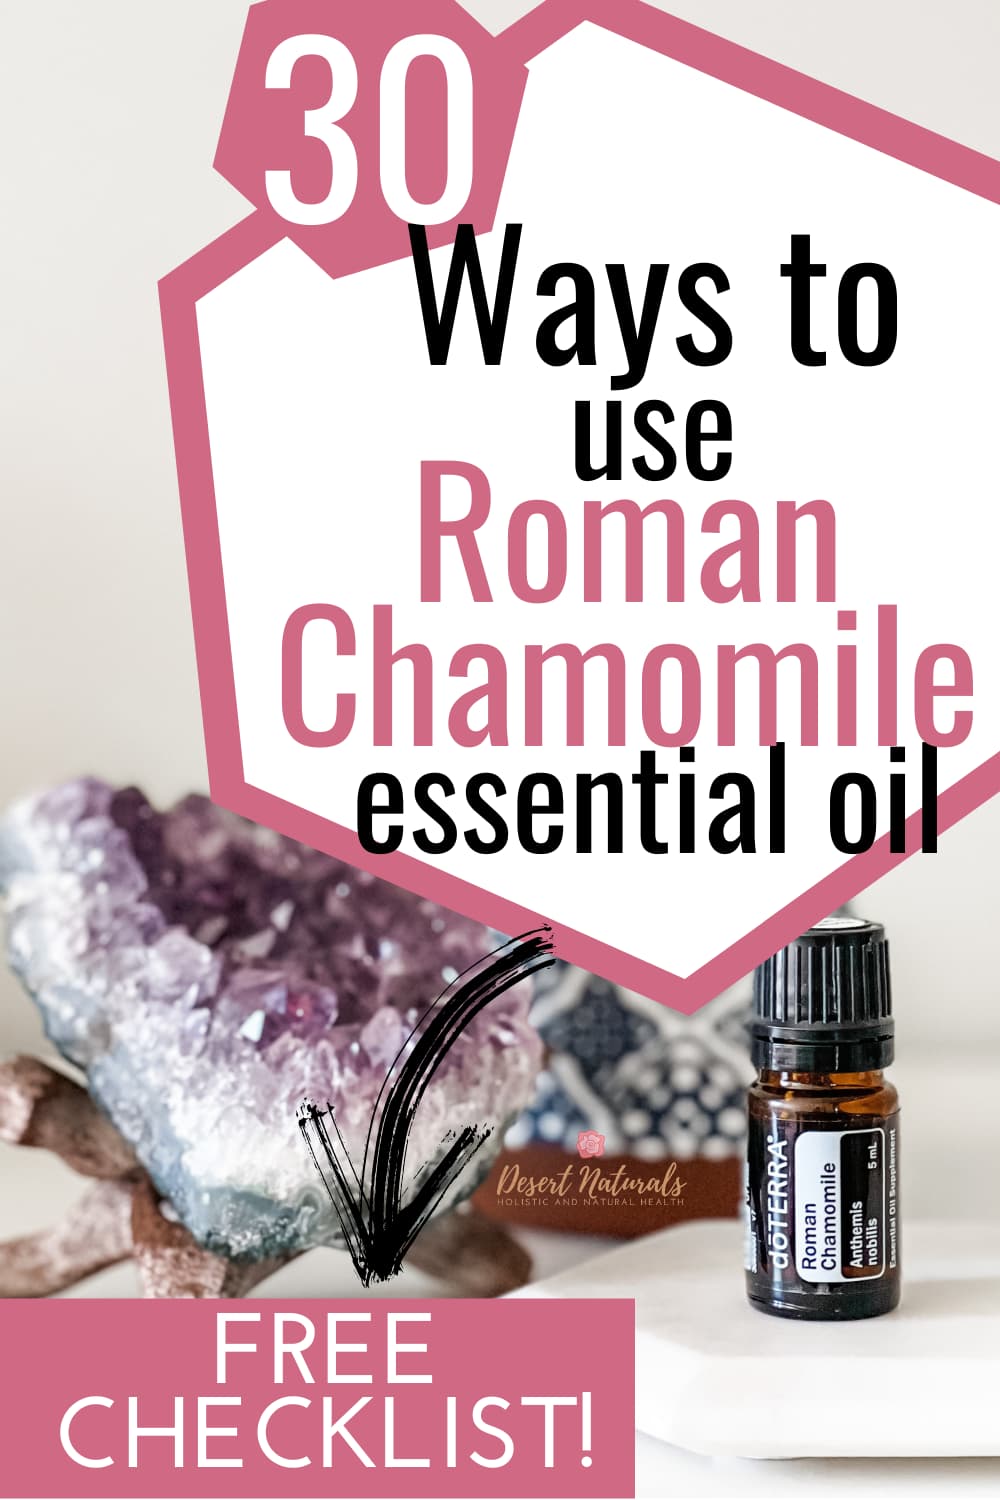 amethyst crystal with bottle of doterra roman chamomile essential oil and text